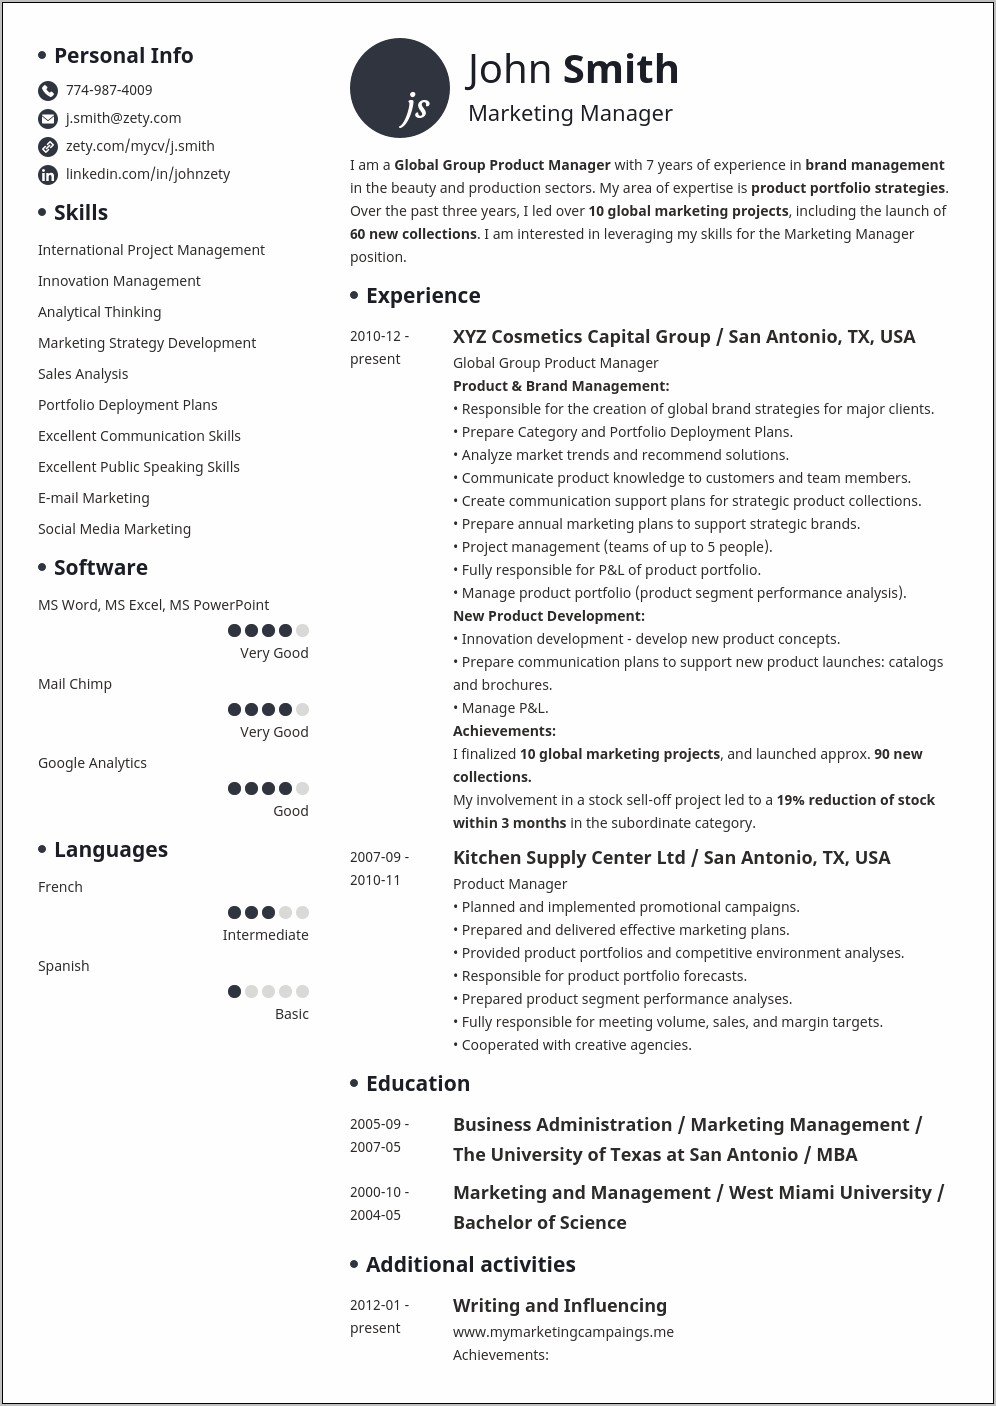 Sample Of Resume With Education